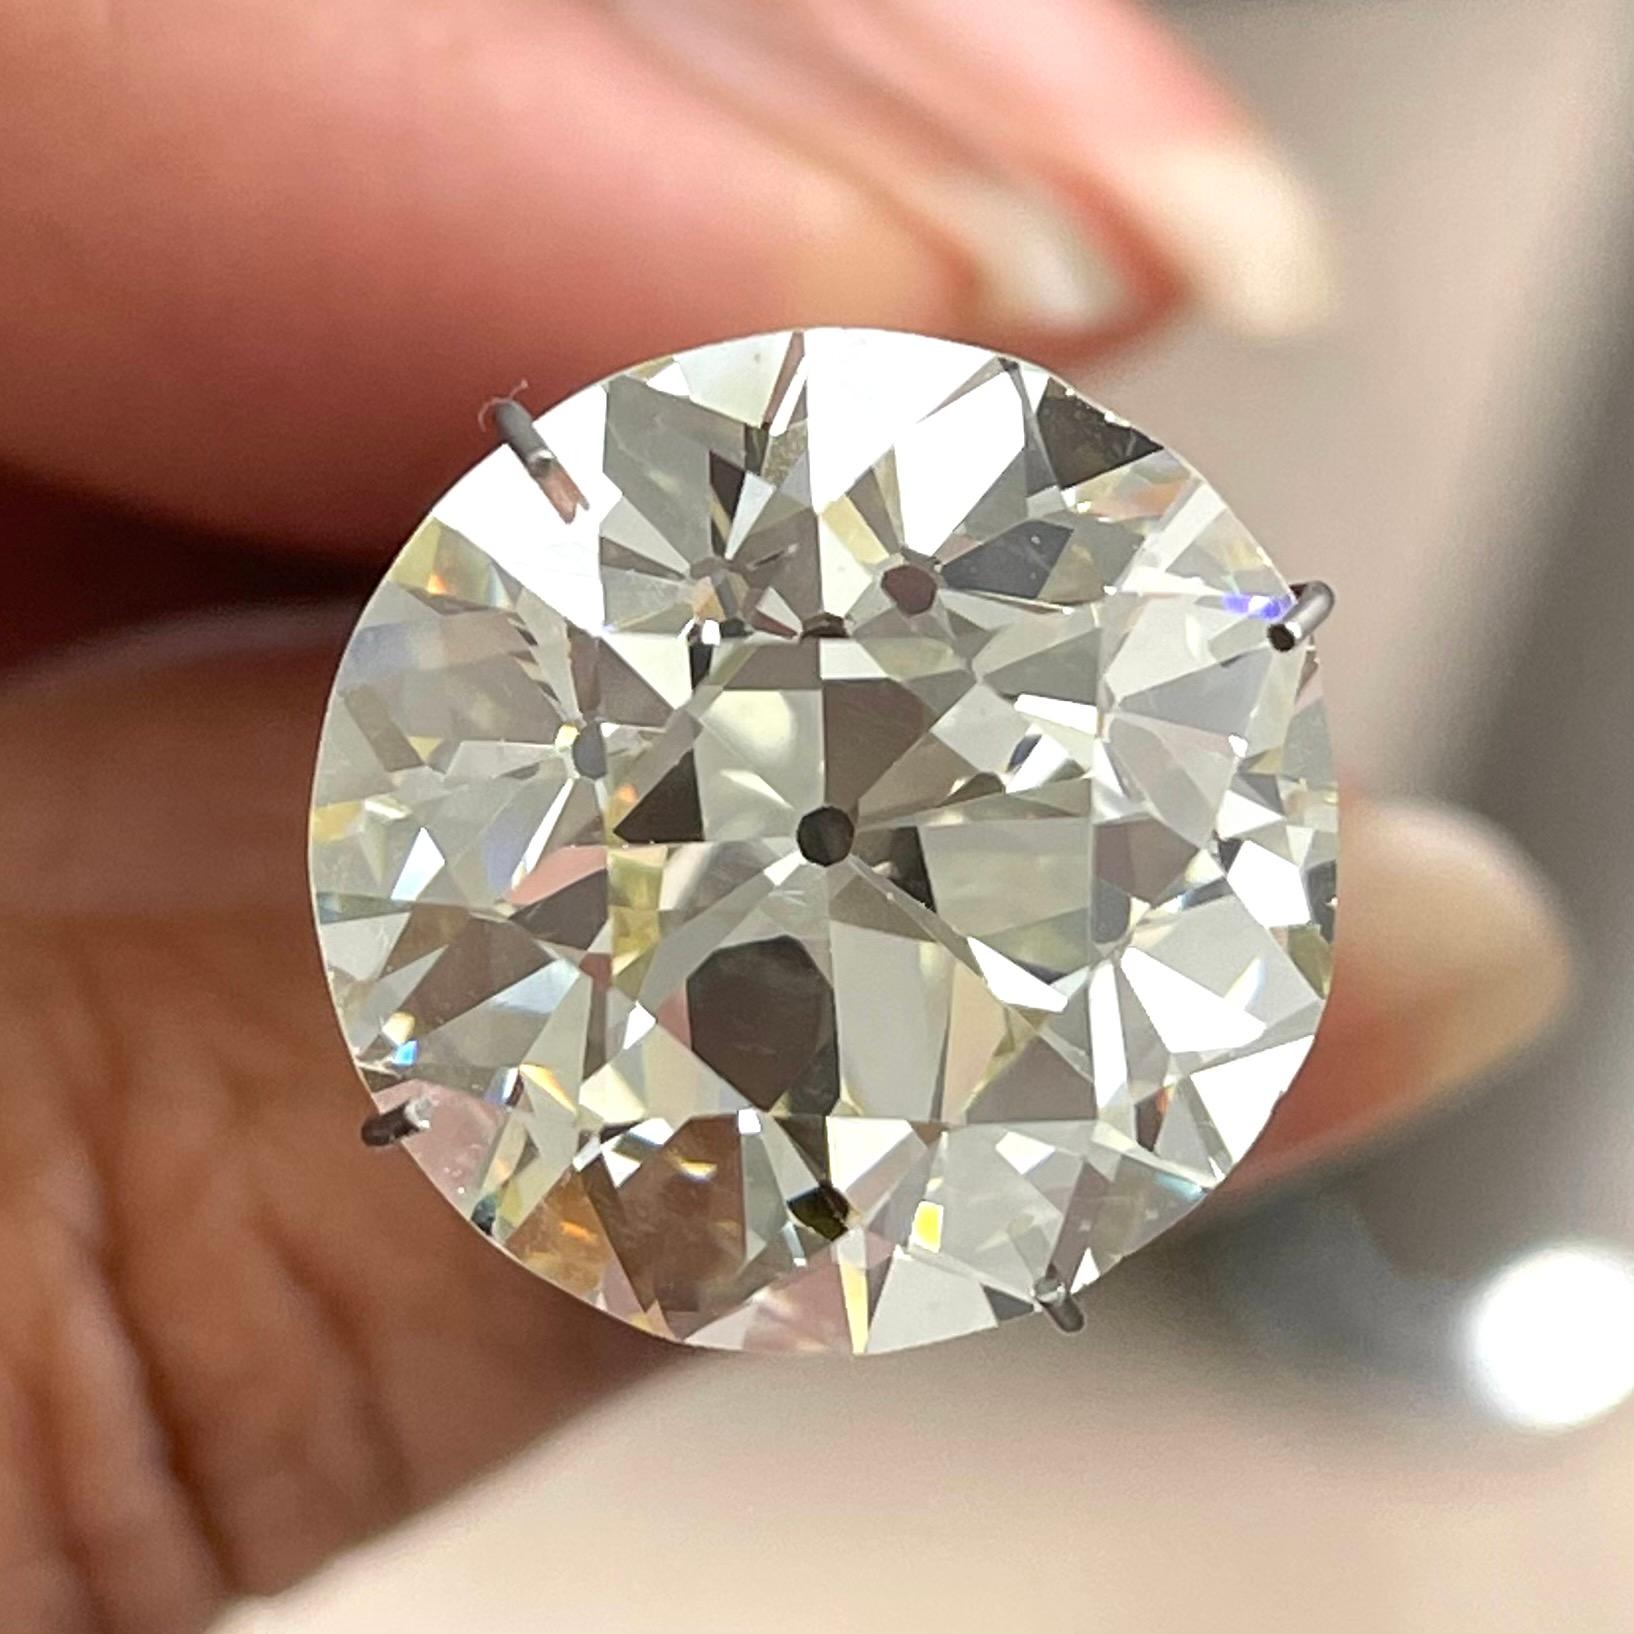 Beauvince Jewelry is excited to present this stunning solitaire and looks forward to customizing and creating a unique one of kind engagement ring or alternate fine jewel for a perfectionist. 

11.98 ct Old European Cut
O-P color VS1